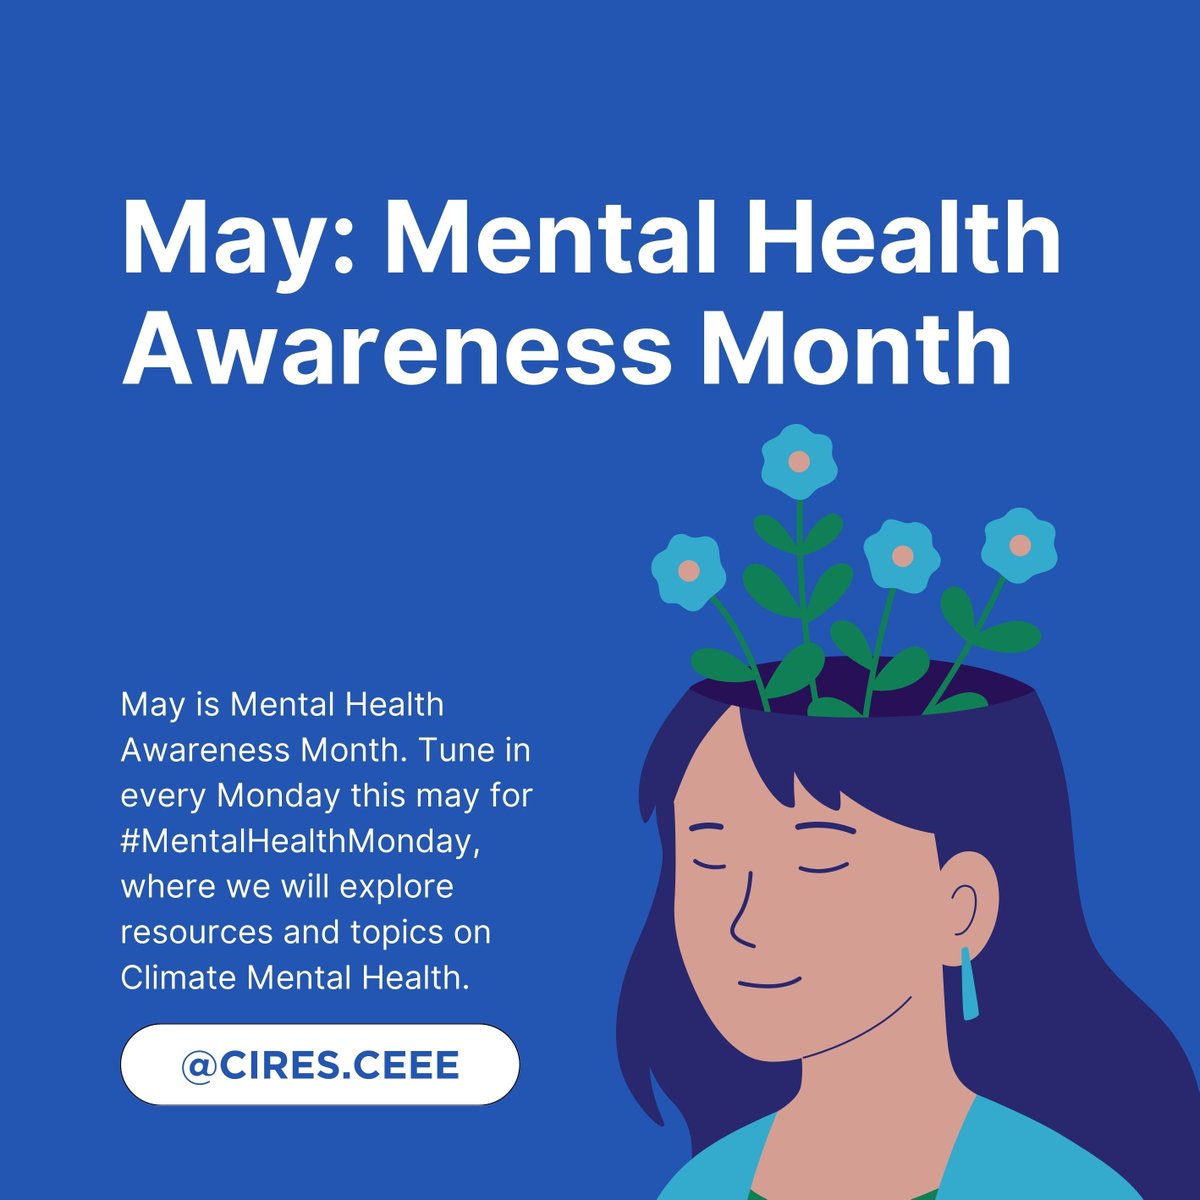 May is Mental Health Awareness Month and this month we will be highlighting Climate Mental Health resources with @CLEAN. Tune in Every Monday for #MentalHealthMondays, where we explore topics relating to Climate Mental Health buff.ly/3QogvG4